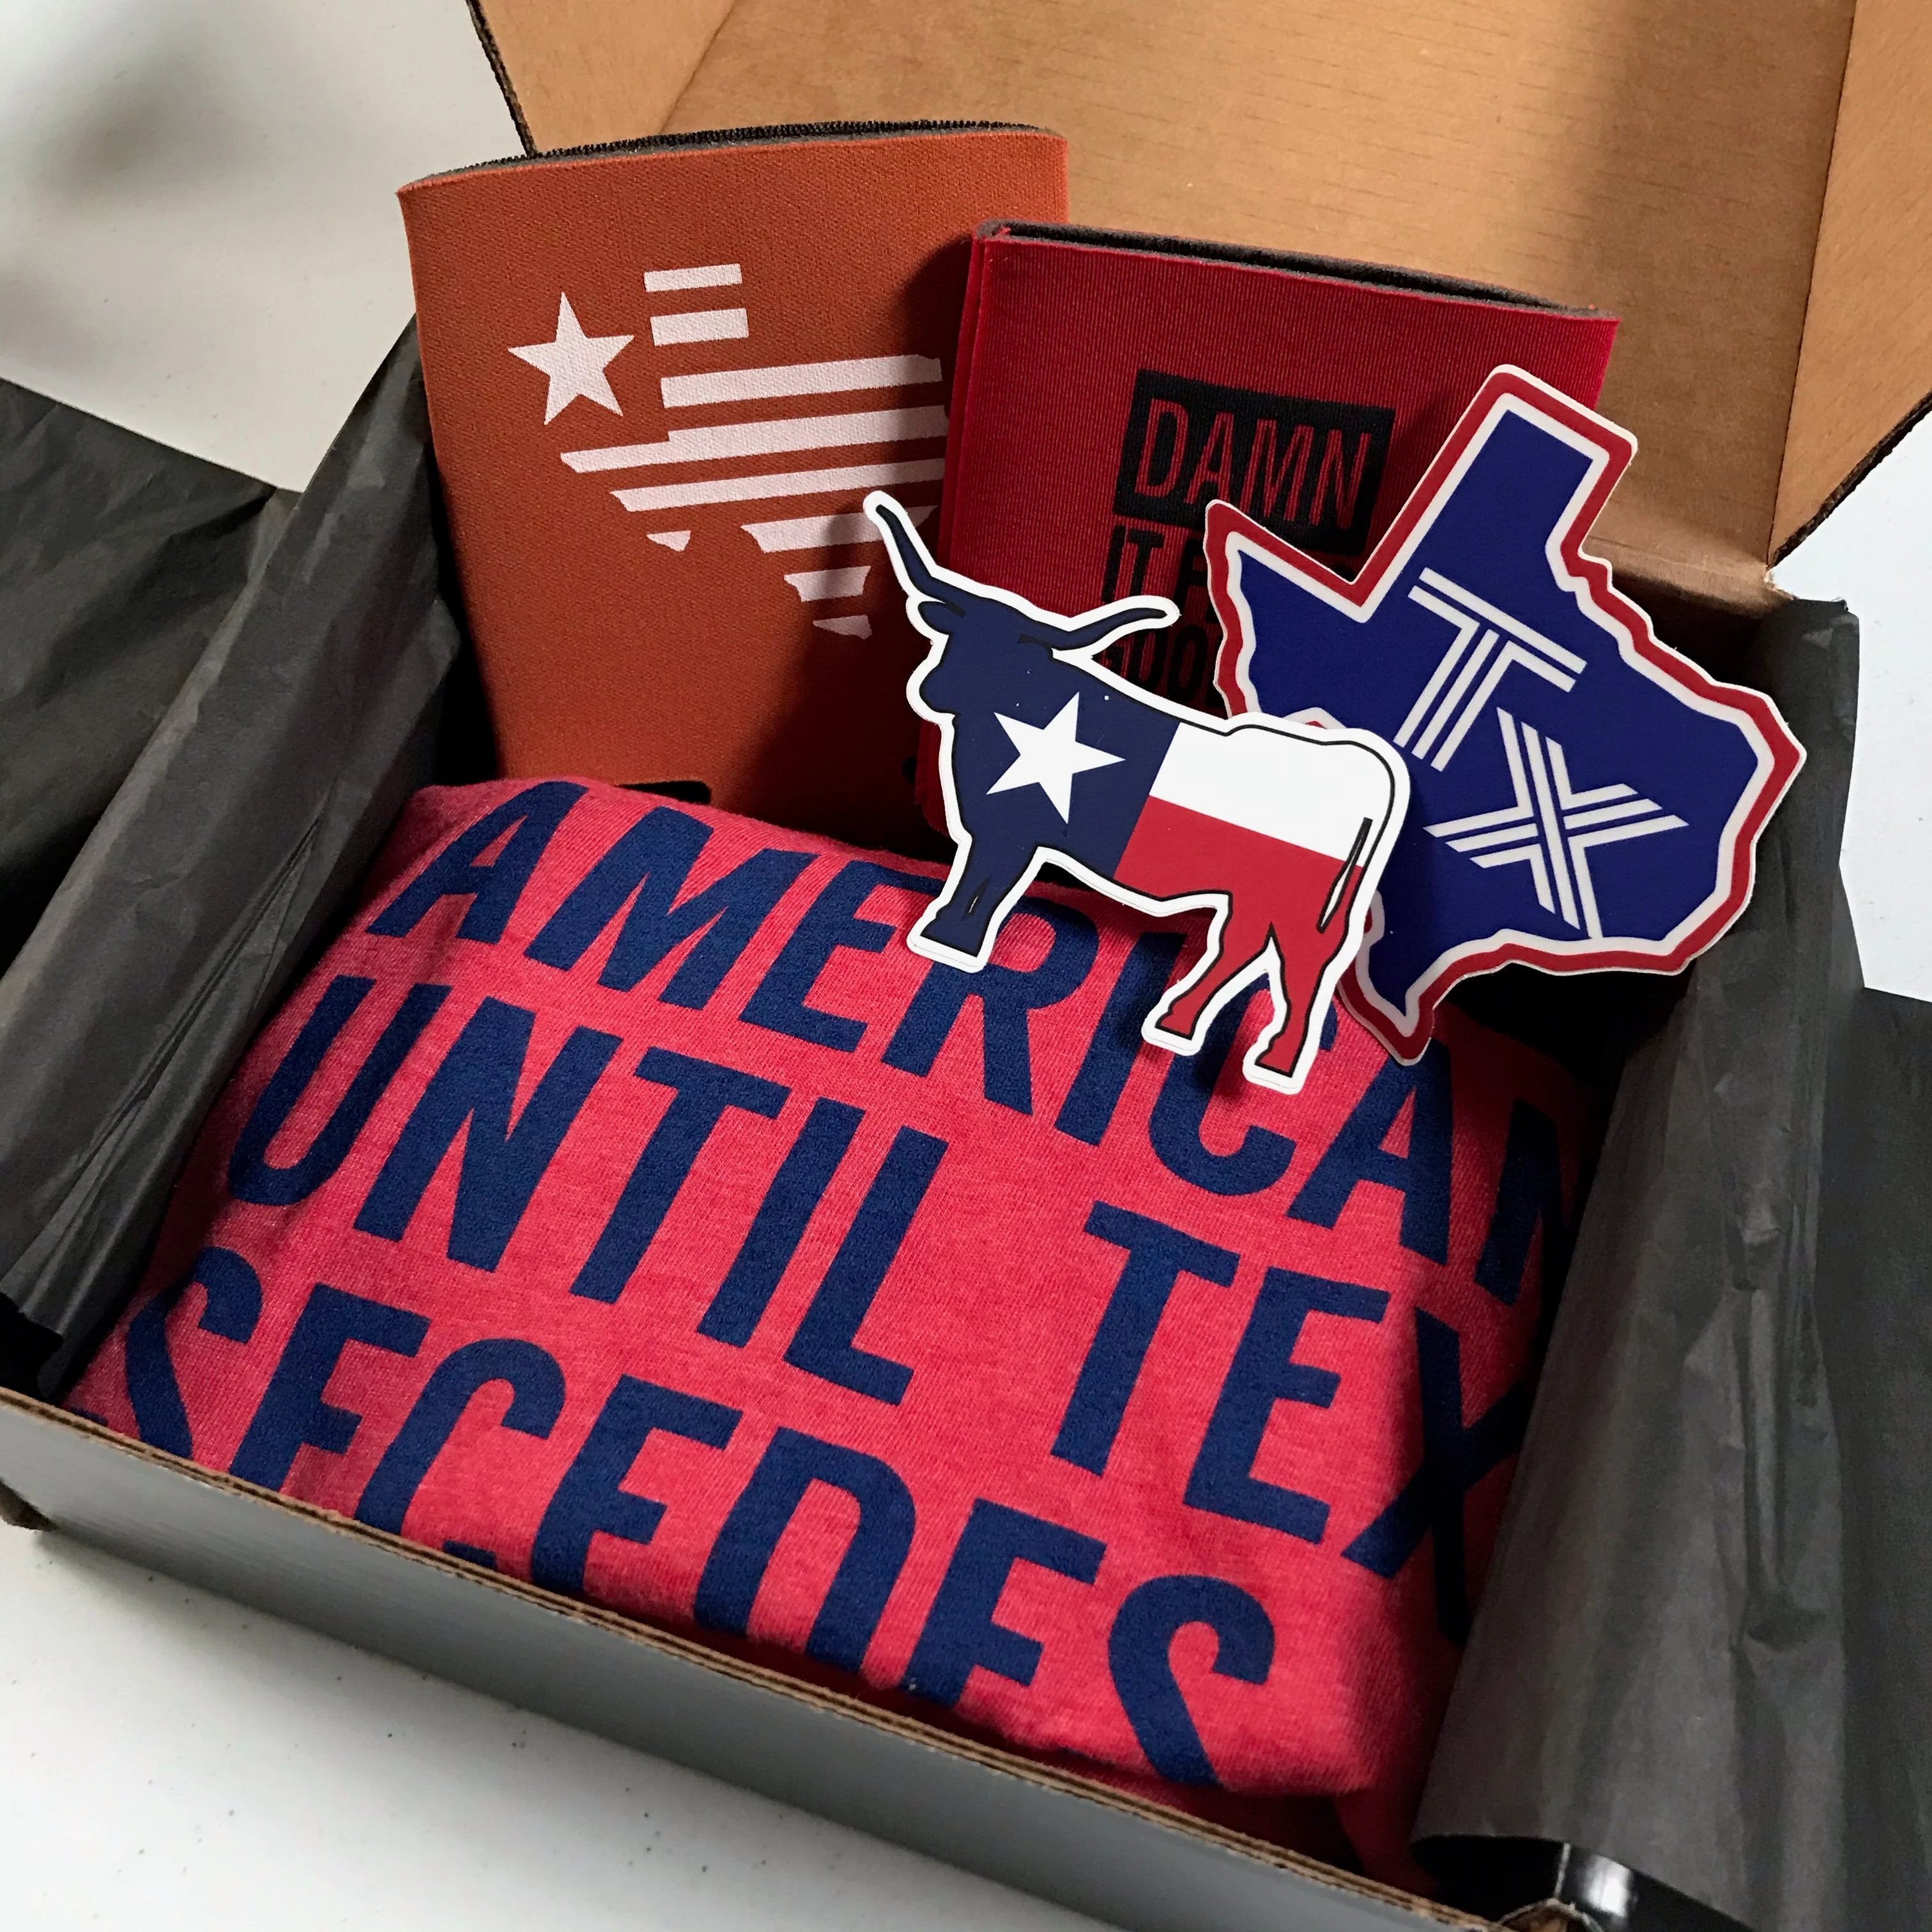 How Do I Incorporate Texas Pride Into My Clothing?